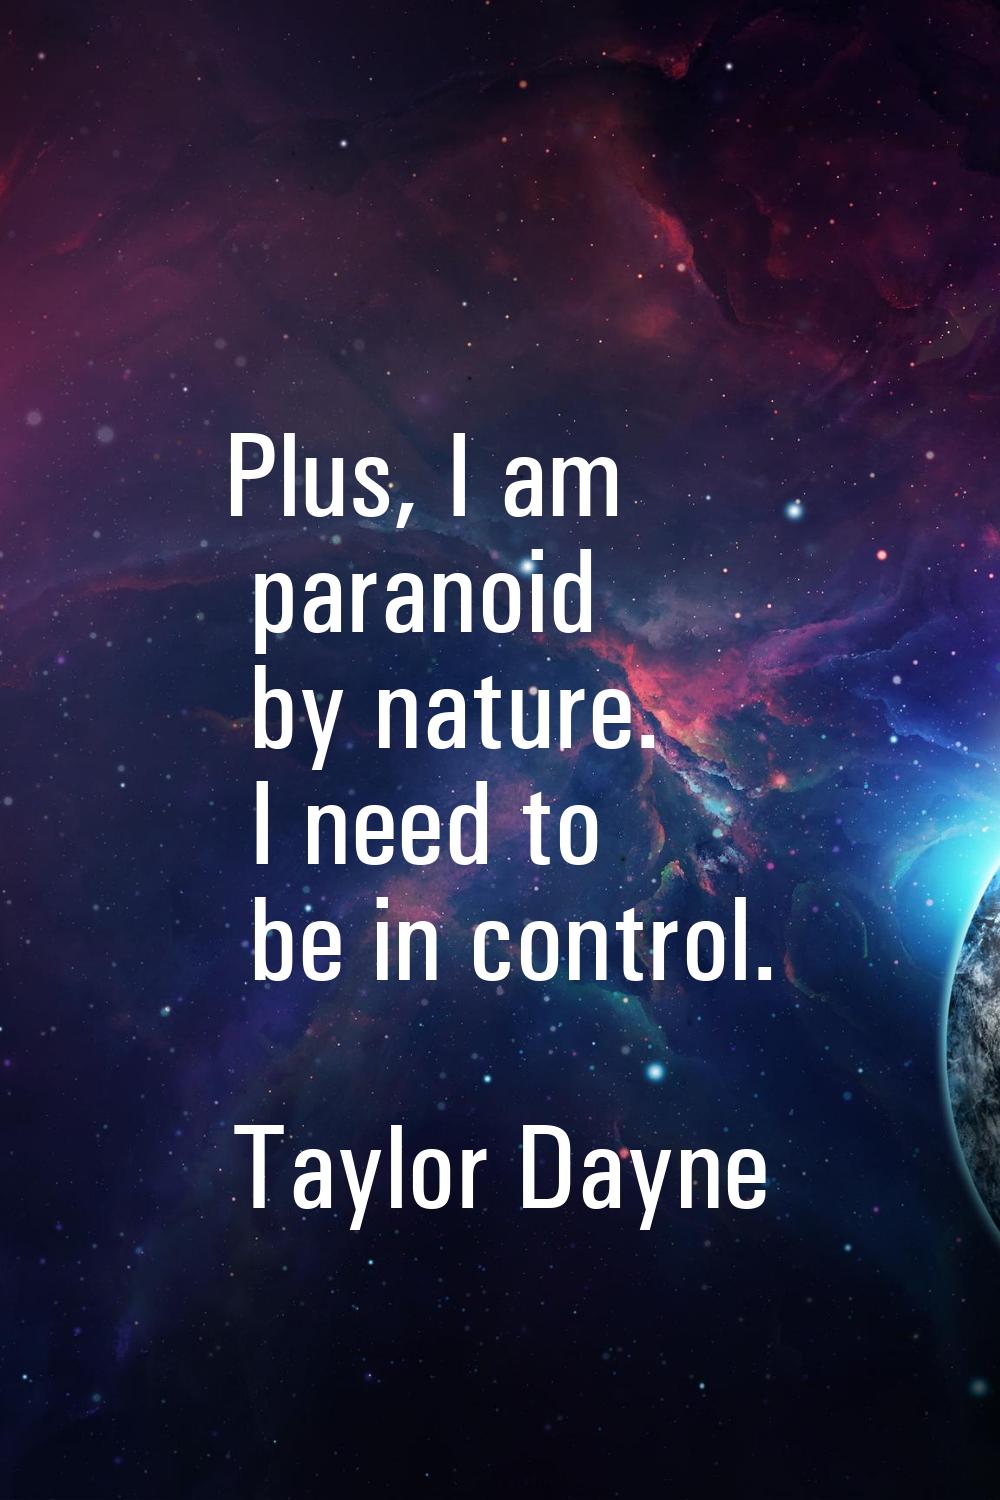 Plus, I am paranoid by nature. I need to be in control.